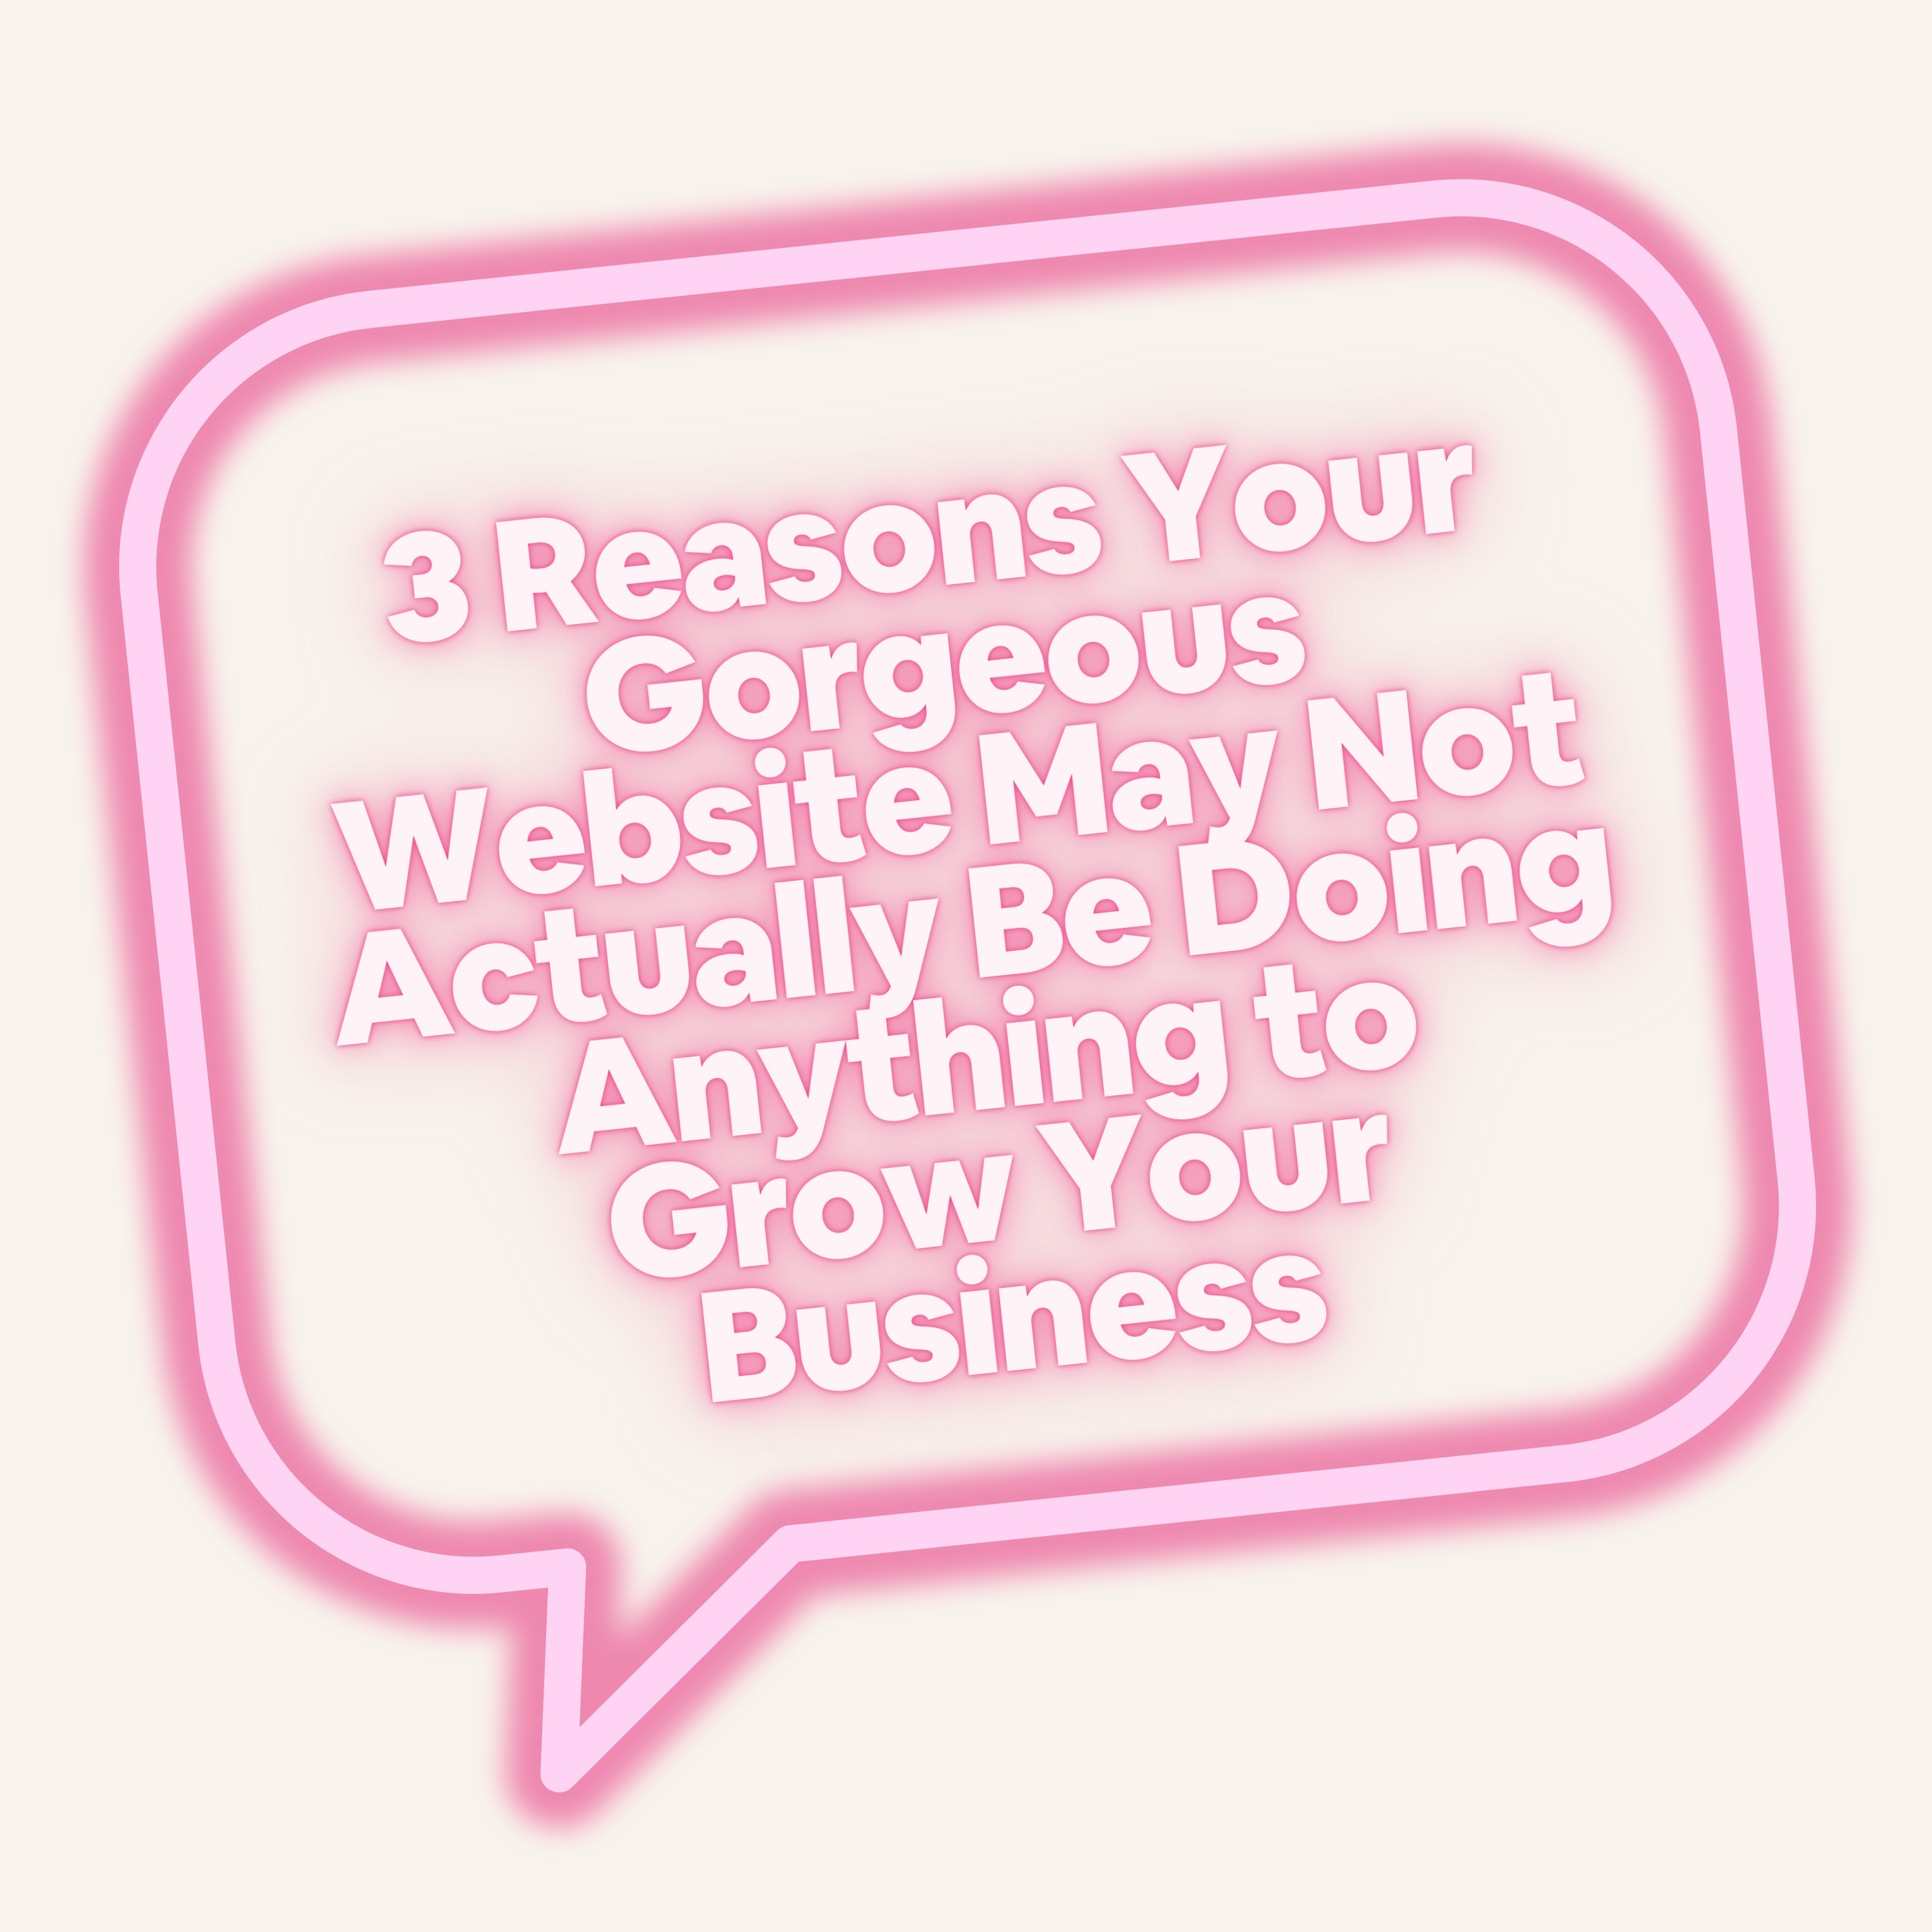 “3 Reasons Your Gorgeous Website May Not Actually Be Doing Anything to Grow Your Business”